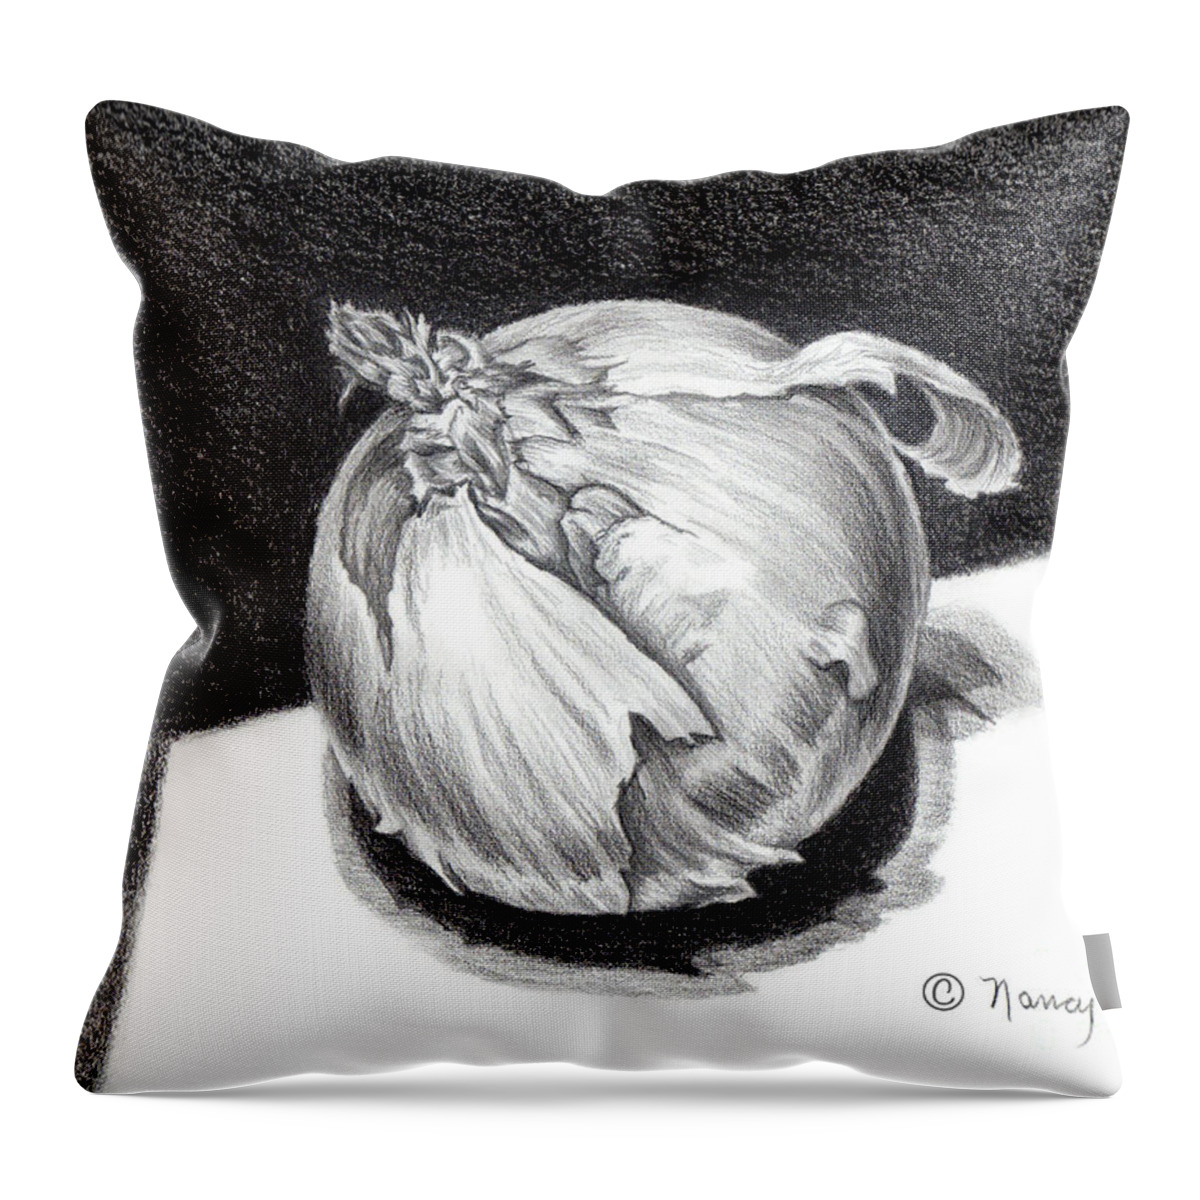 Onion Throw Pillow featuring the drawing The Onion by Nancy Cupp